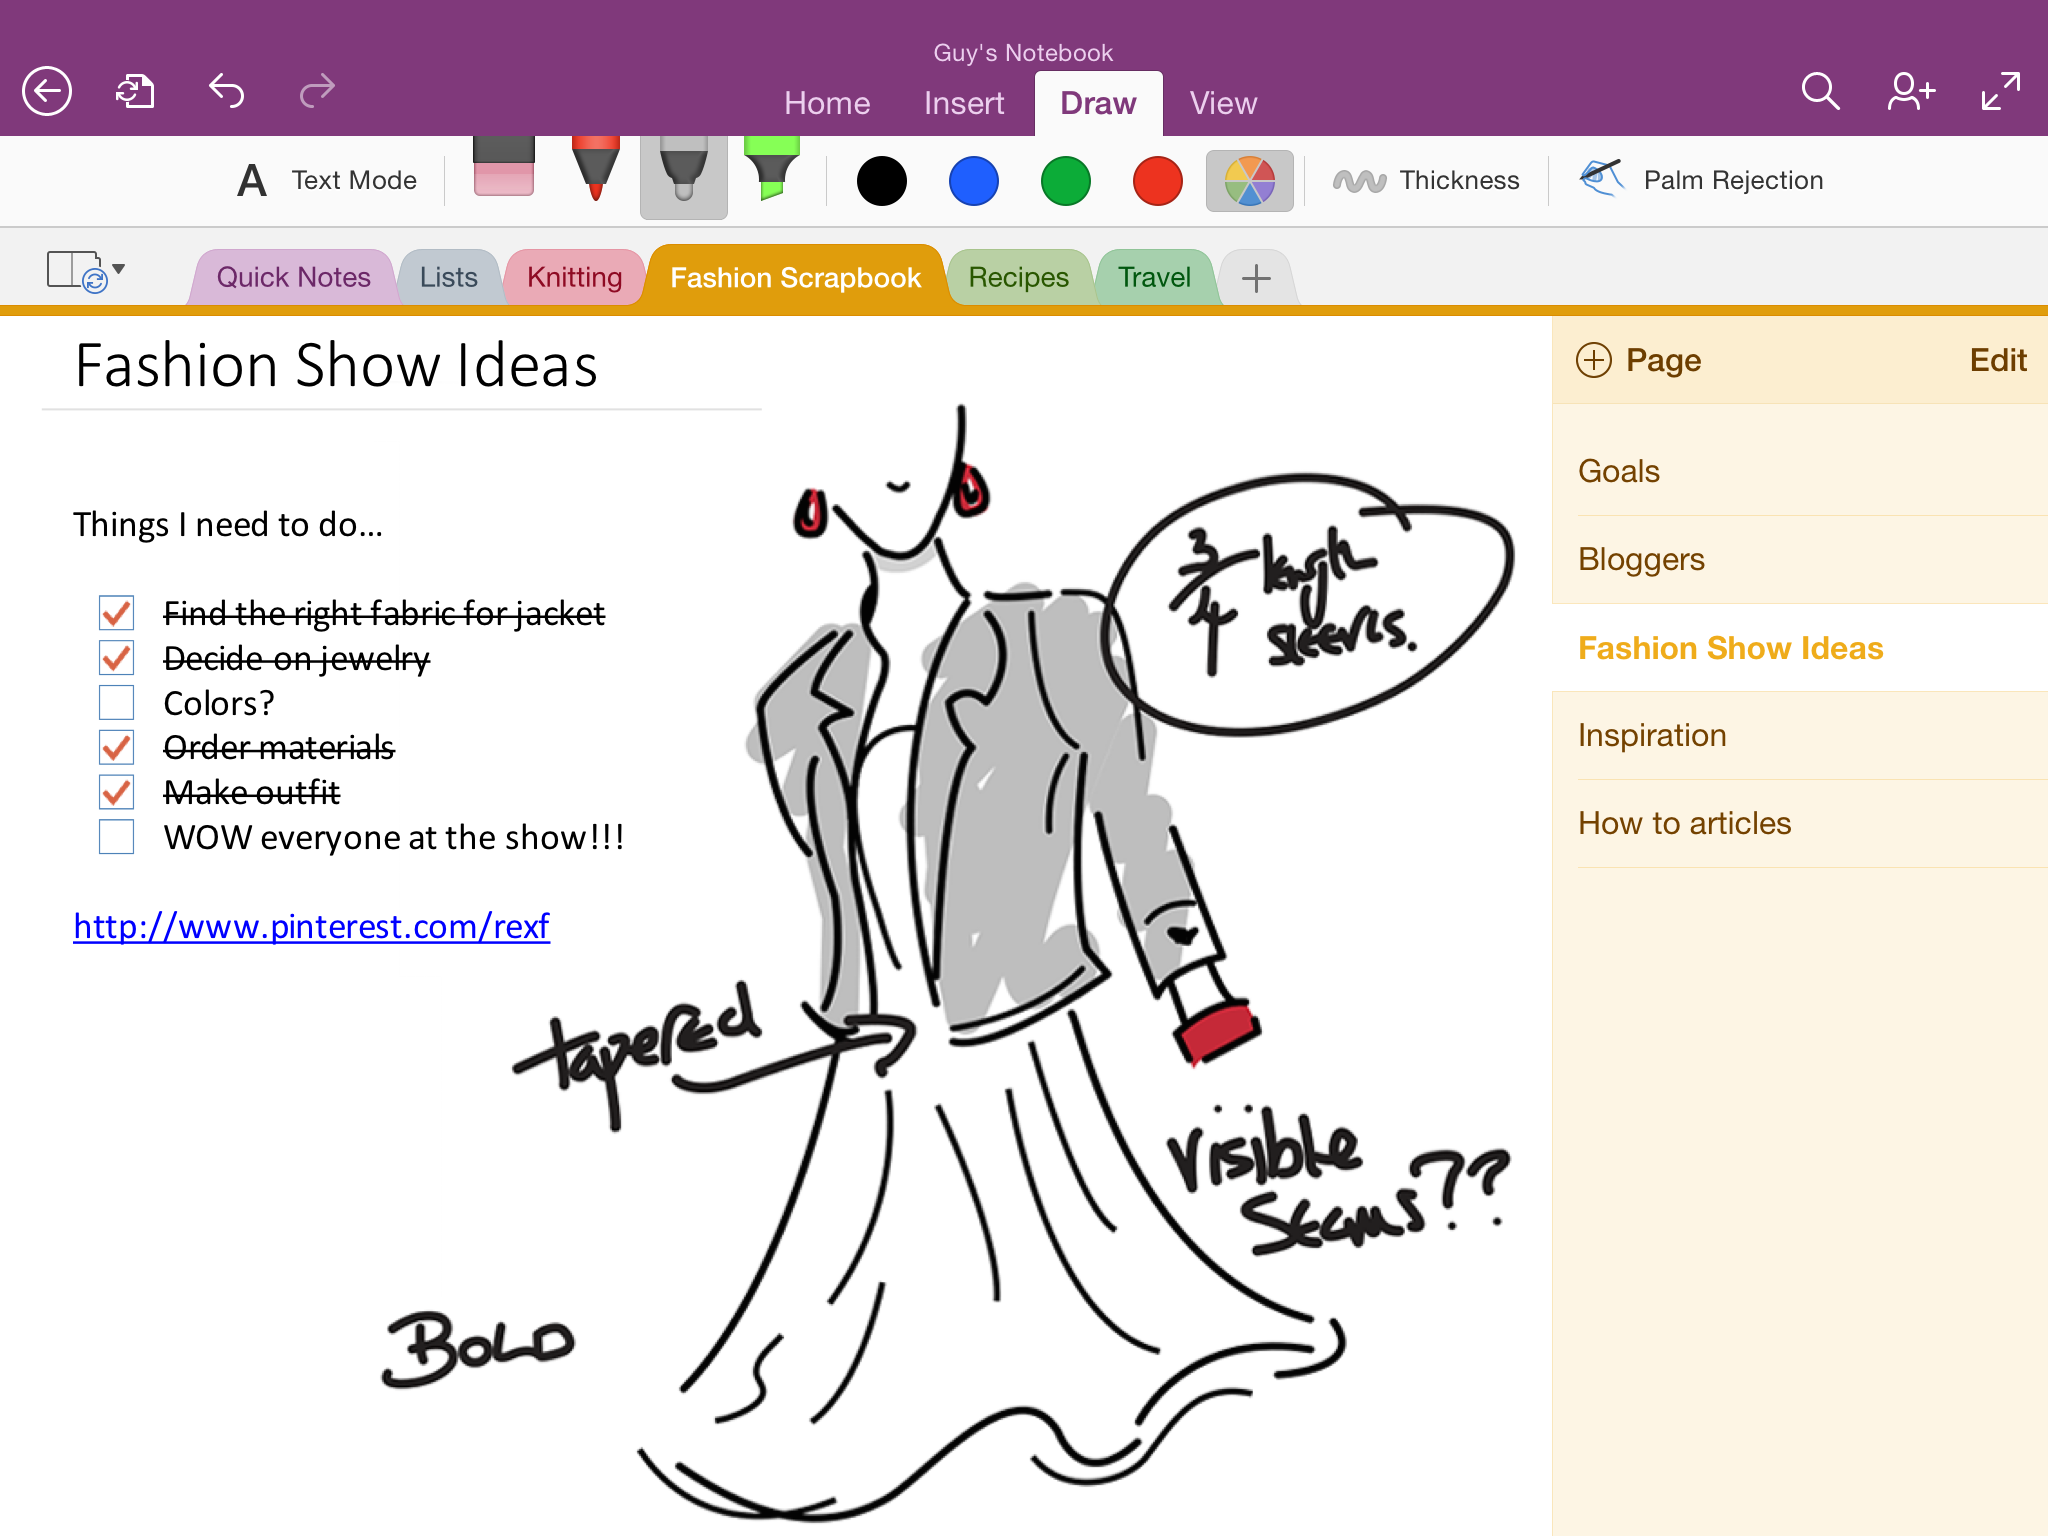 ink to text onenote for mac